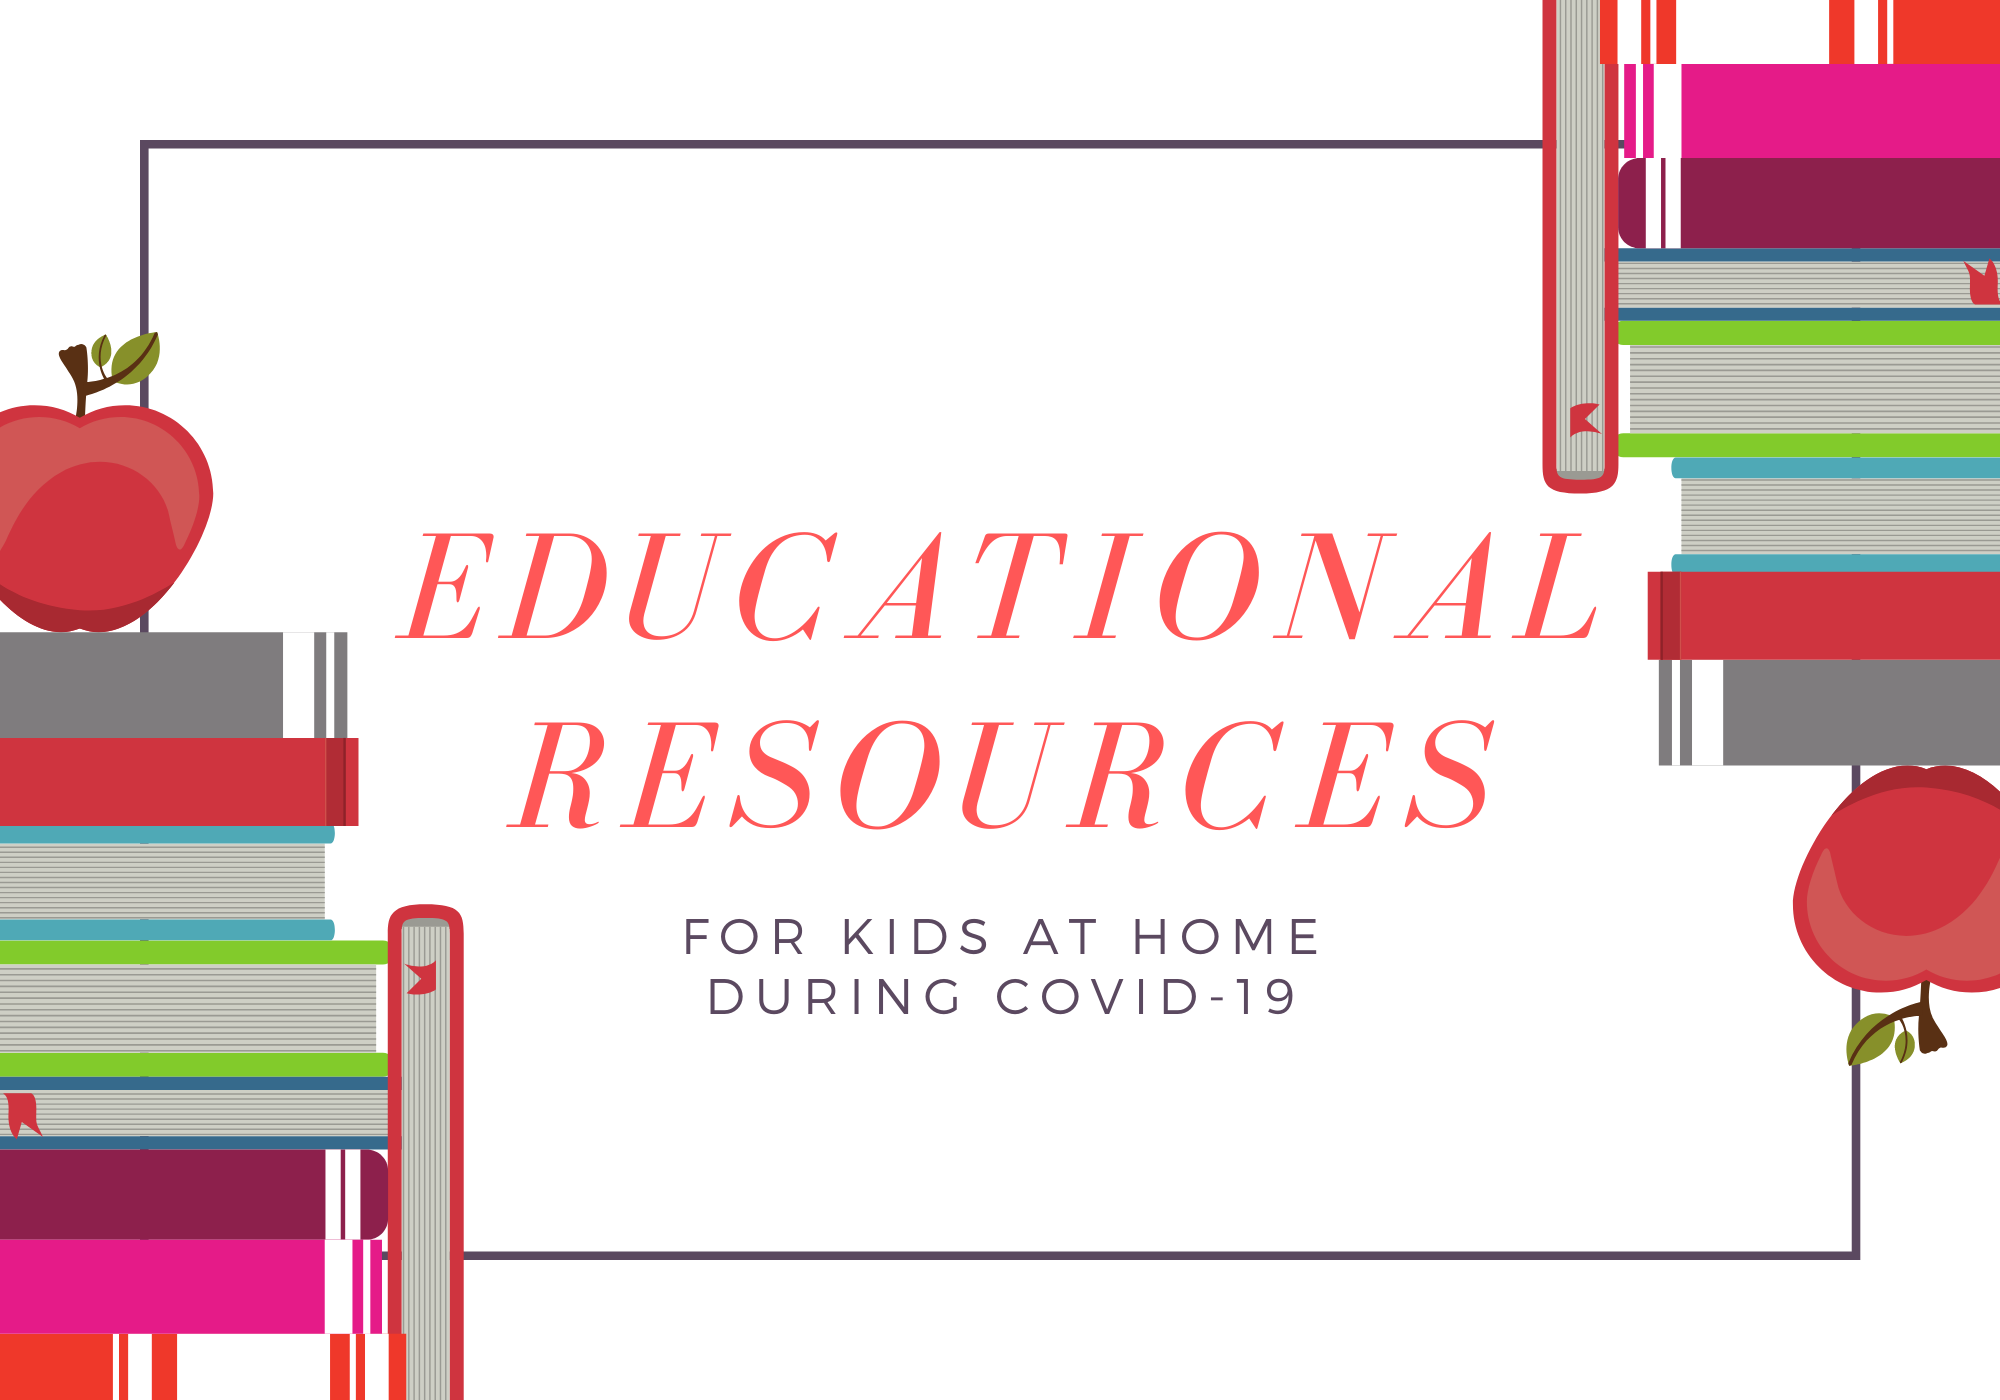 Working Mom Struggles: At-Home Resources for Kids